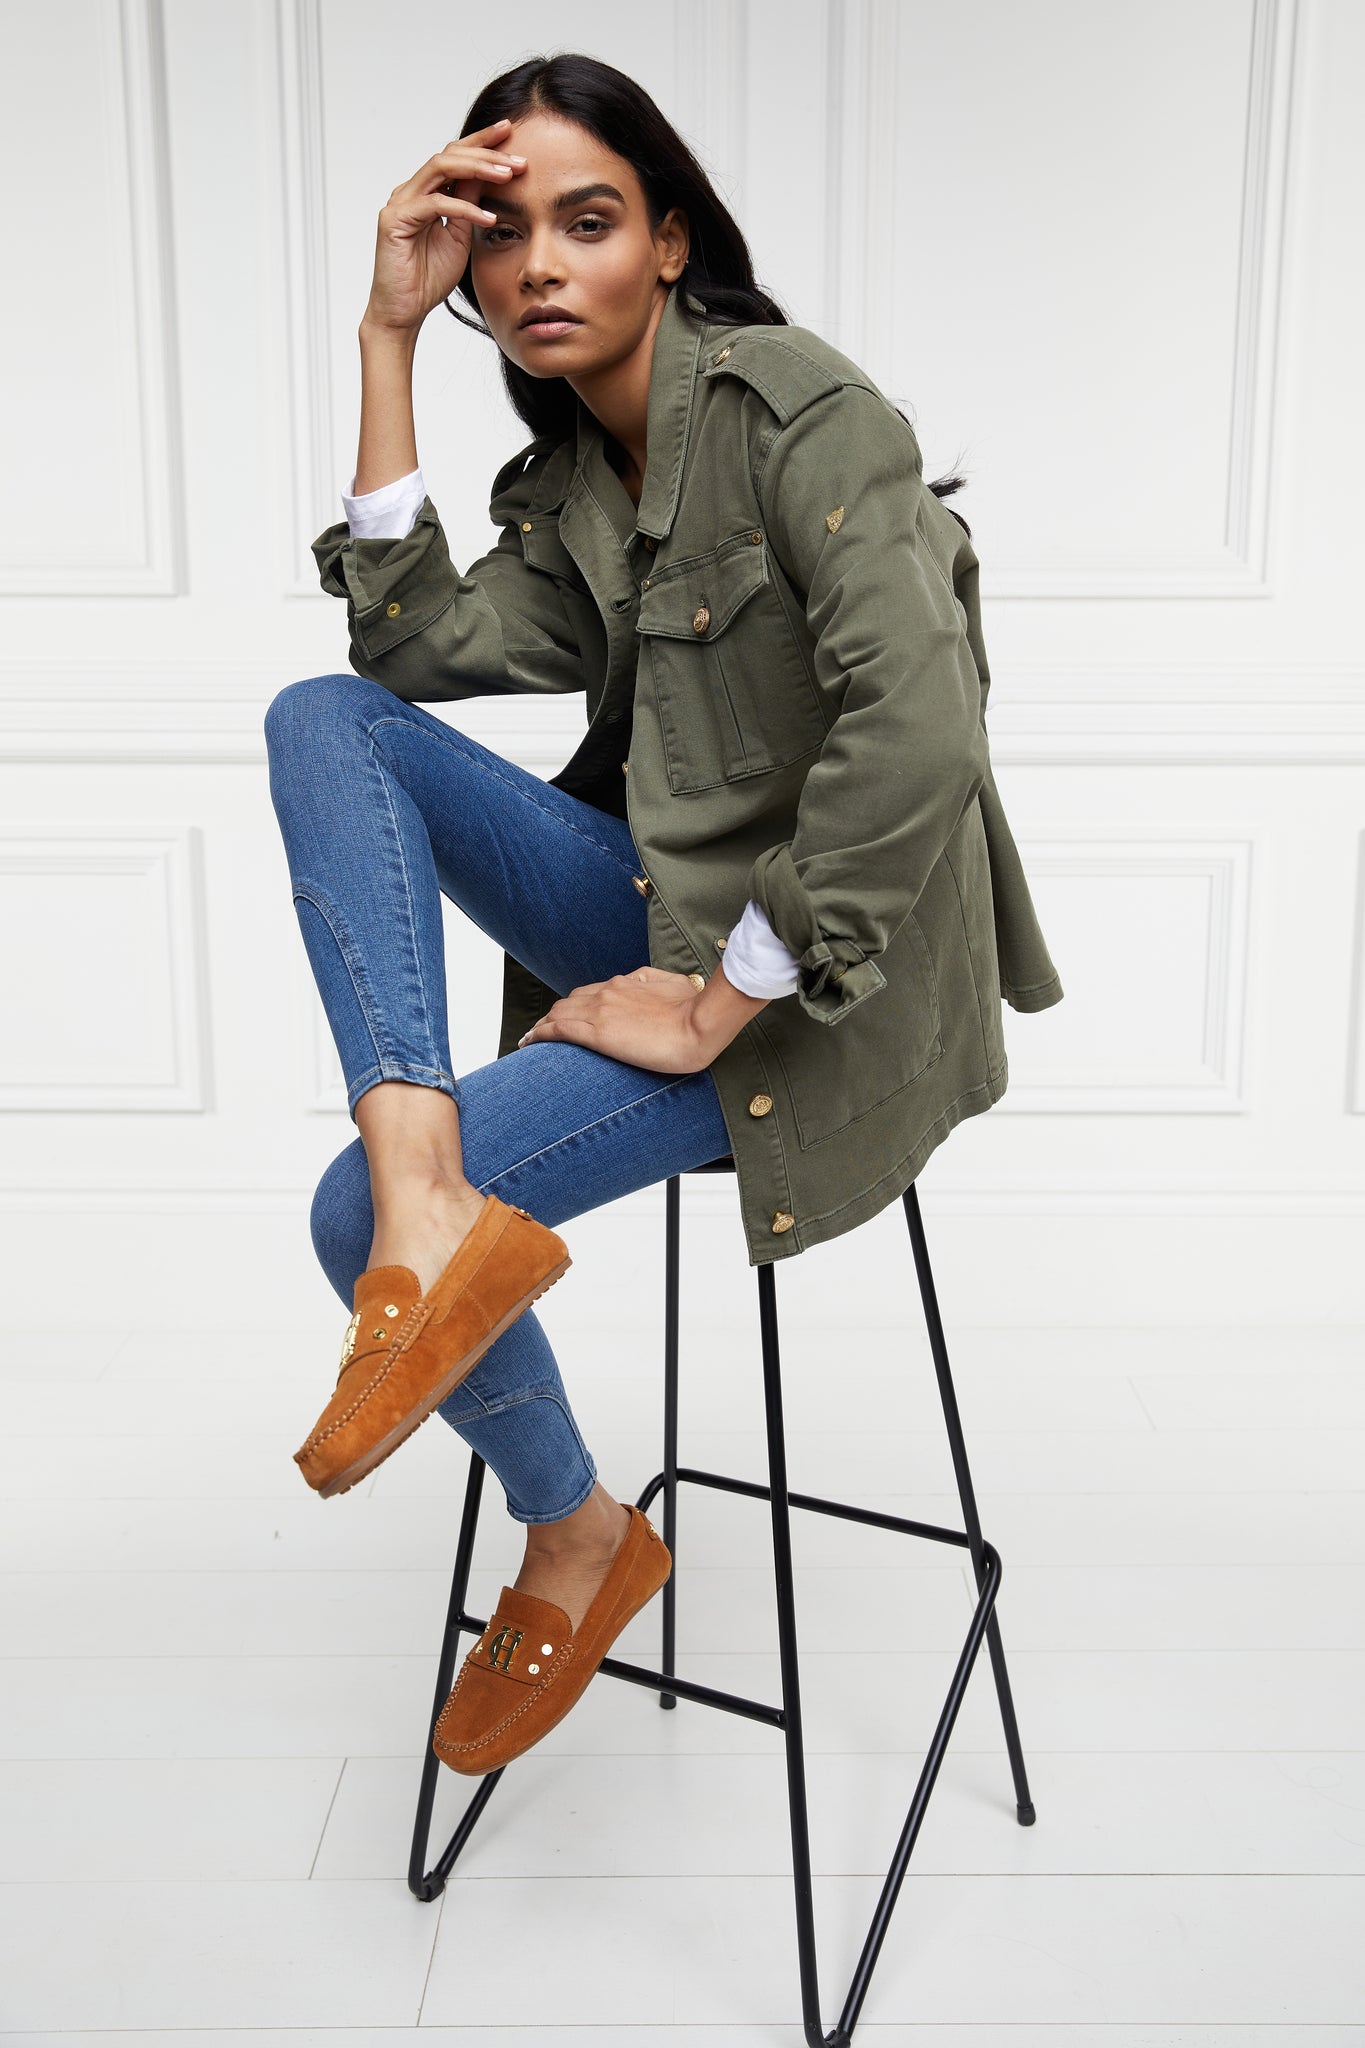 Relaxed fit collared artillery style jacket in khaki with four pockets two chest ones being box pleated  and two hip being patch pockets with gold jean button fastenings adjustable long sleeves and epaulette shoulder detail